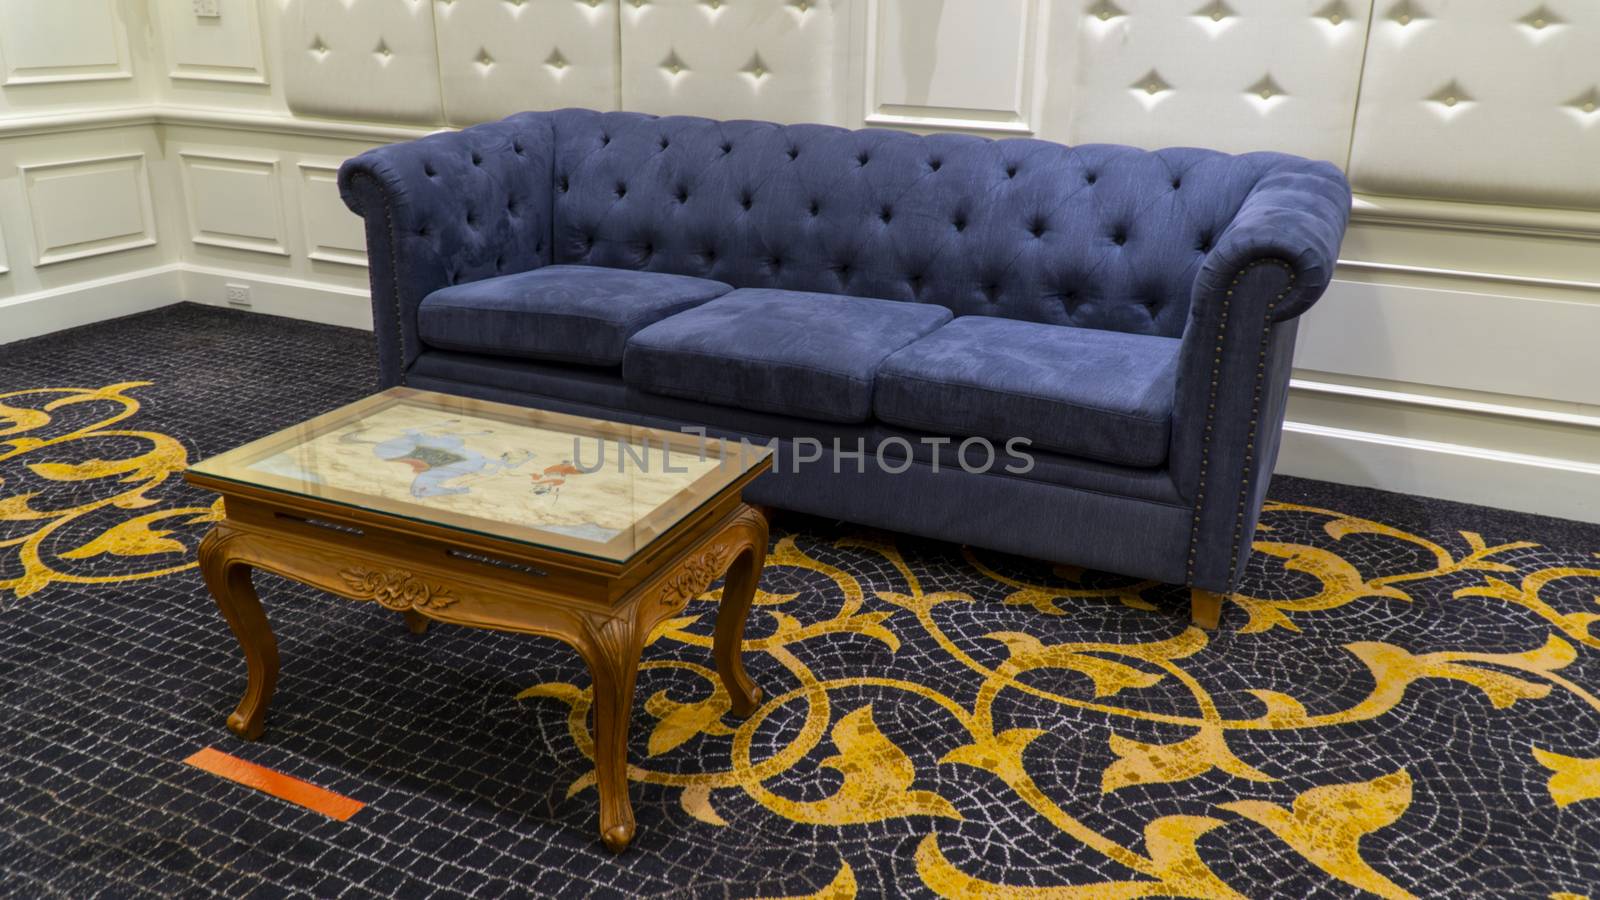 Blue vintage sofa with teak coffee table in a living room.